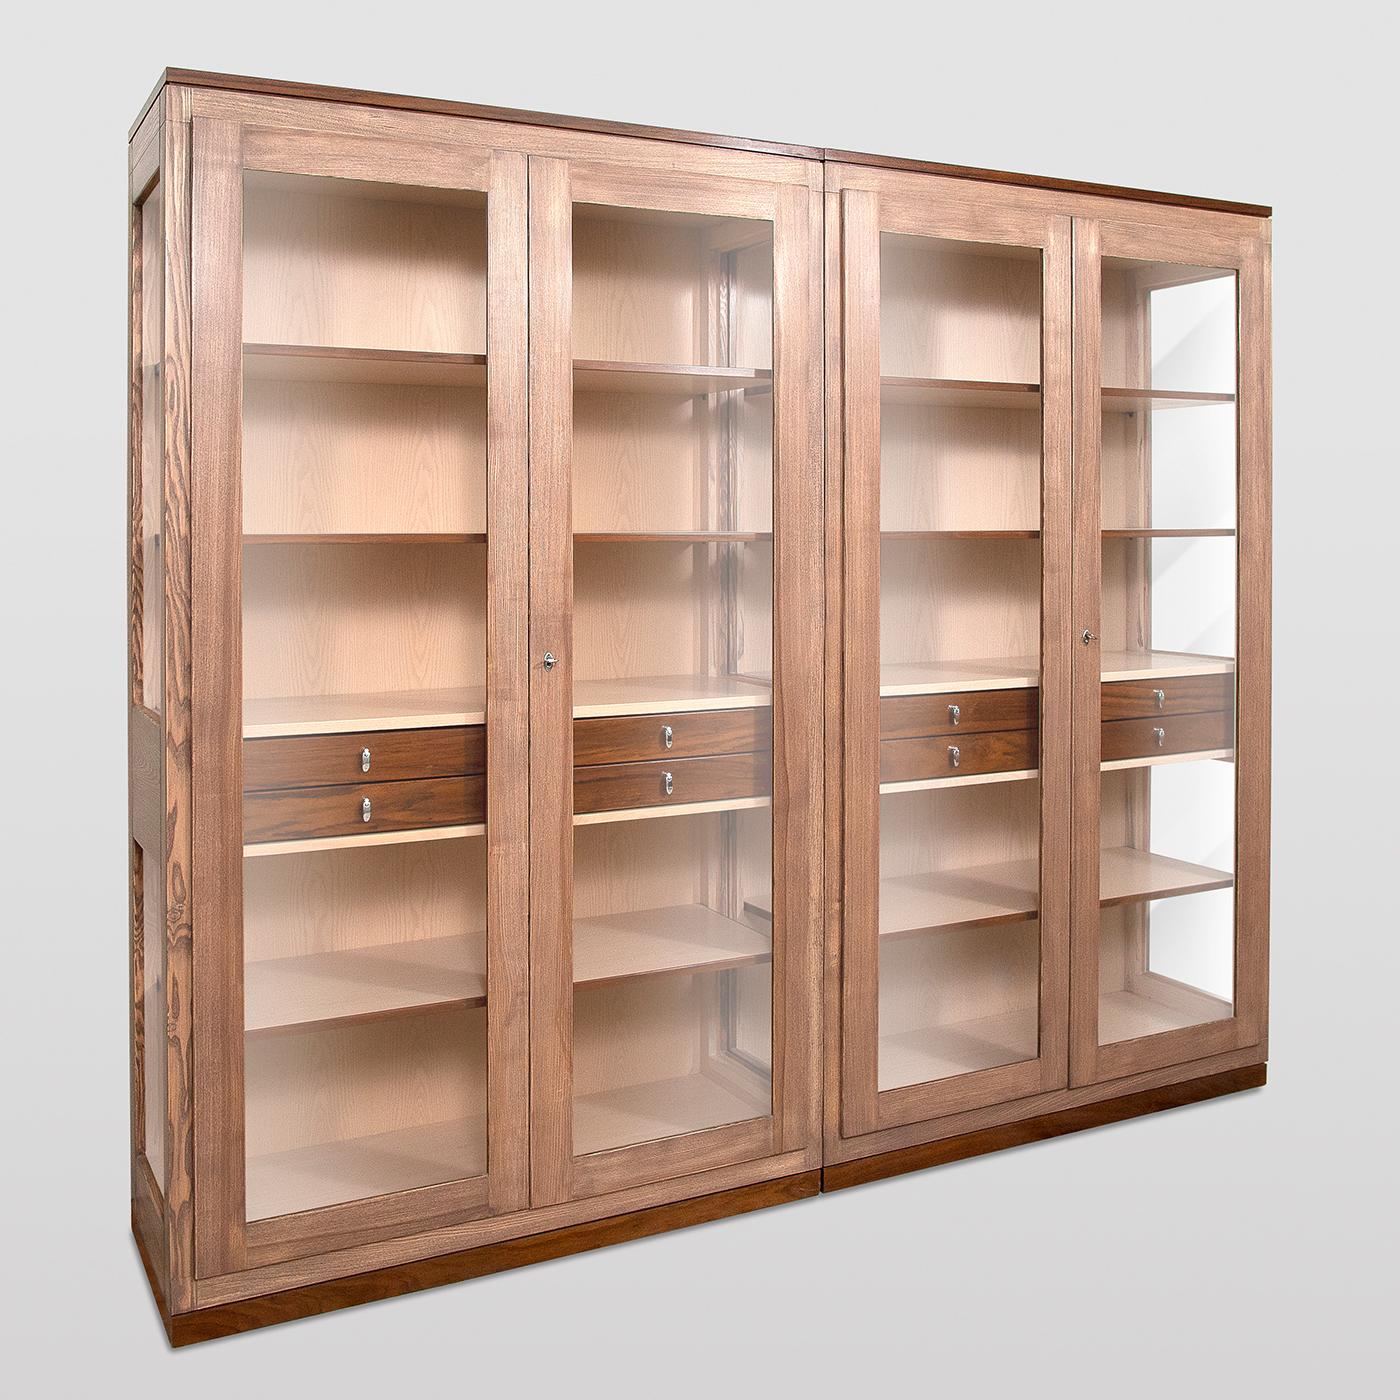 Designed by Erika Gambella, this modular bookcase flaunts a clean and functional shape typical of Nordic design. Furnished with eight internal drawers and six wooden shelves, it is handcrafted using high-quality techniques, adding to its refined and